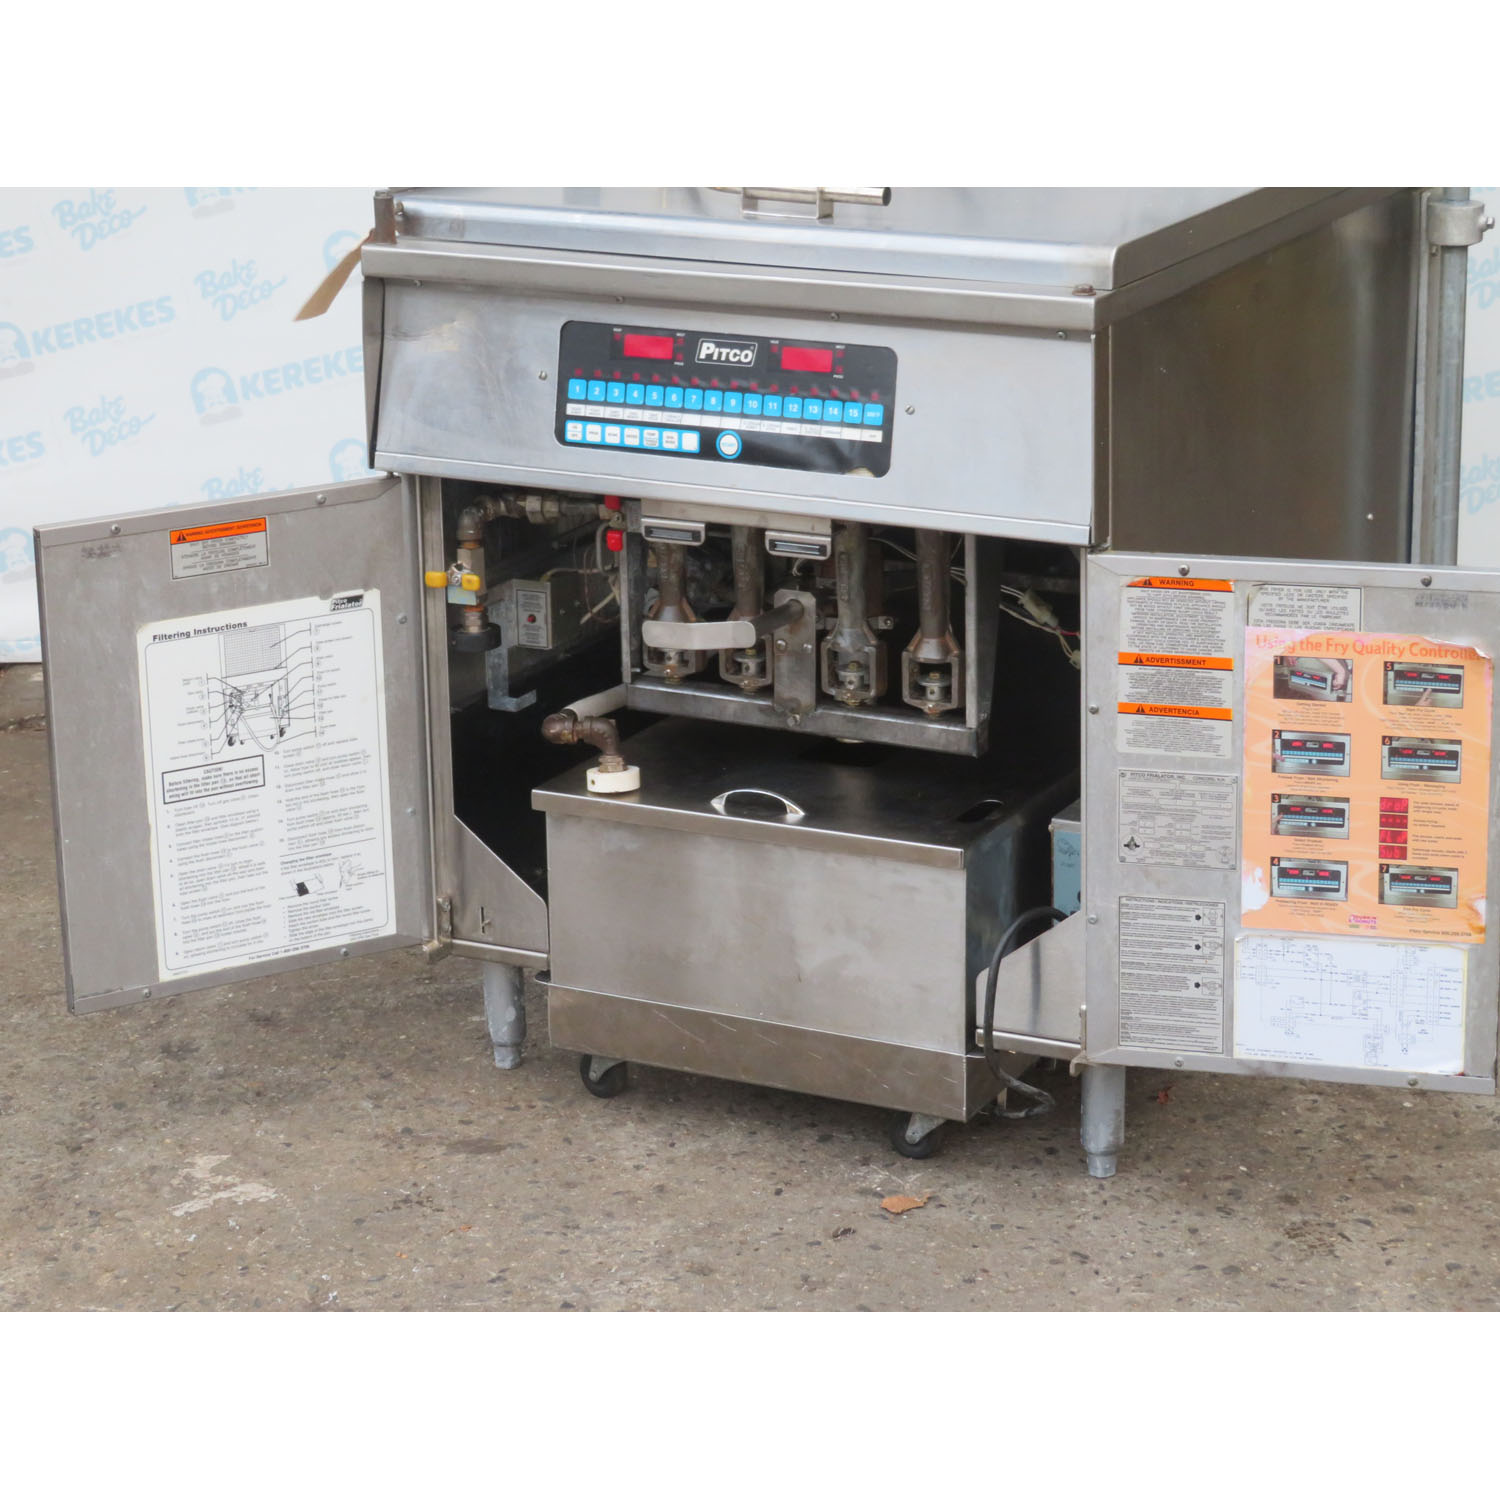 Pitco DD24RUFM Gas Donut Fryer with Oil Filter, Used Great Condition image 4